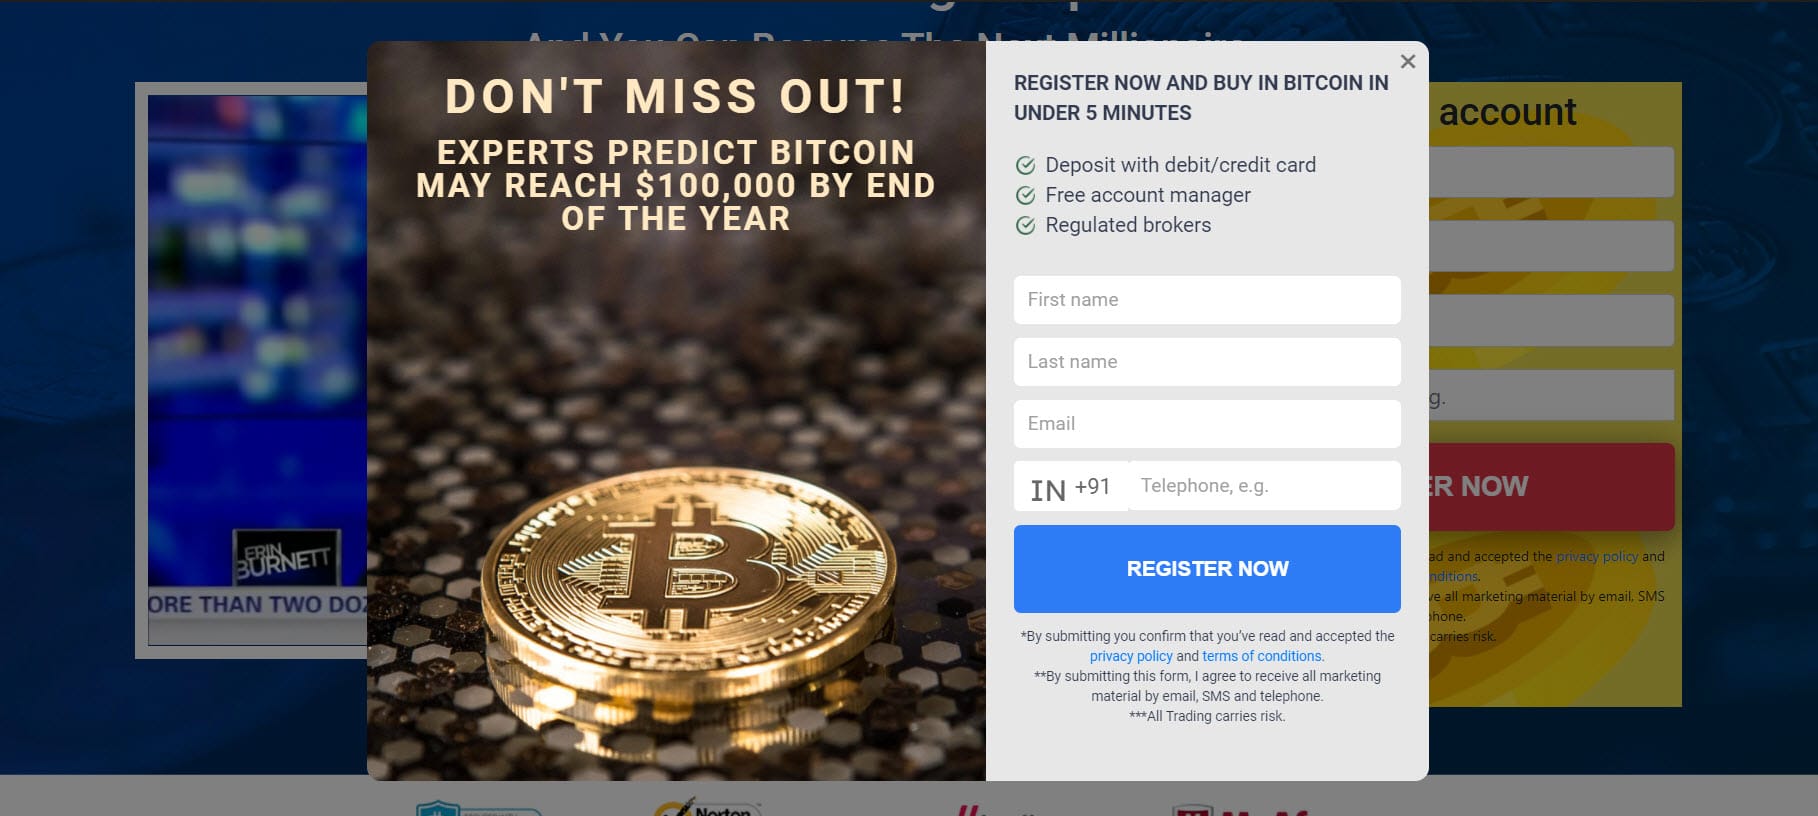 Bitcoin Revolution Review 2021: Is it Legit, or is it a Scam?